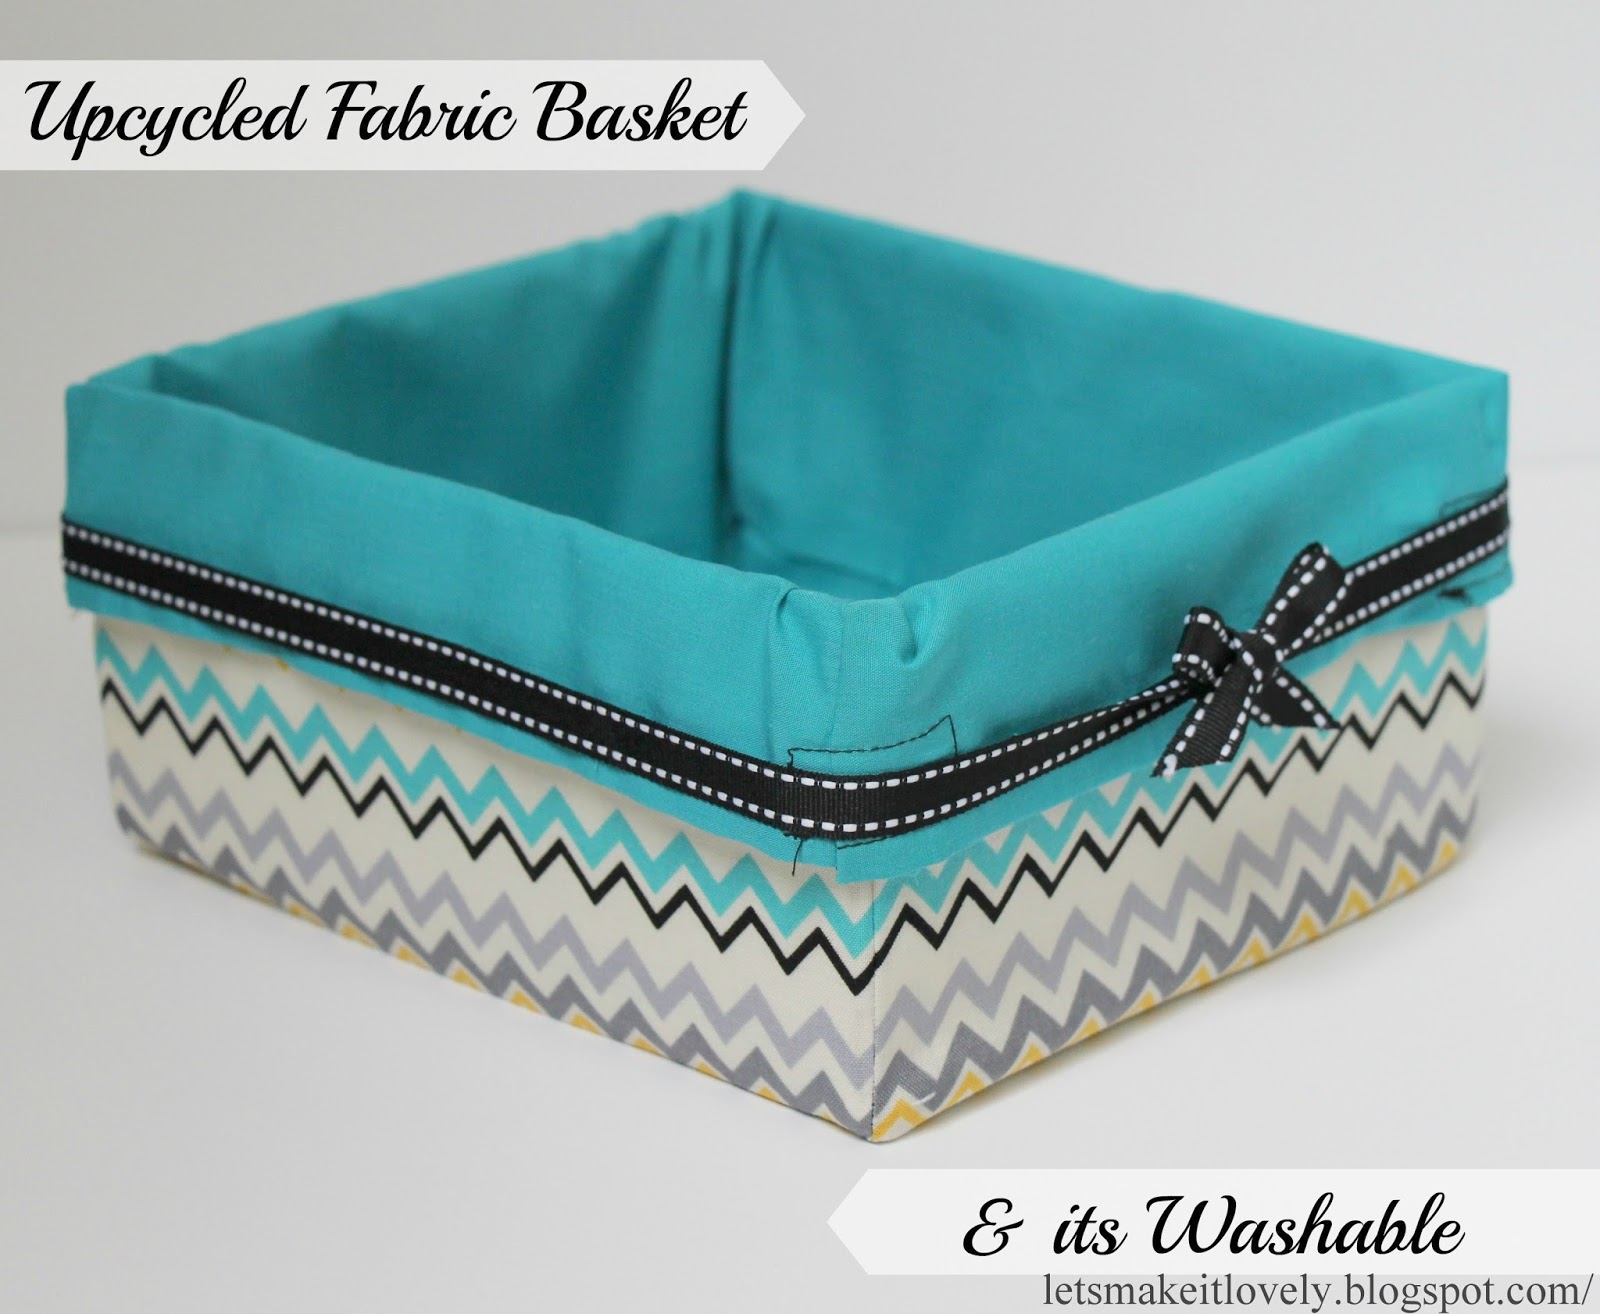 Upcycled Fabric Basket from Cartons